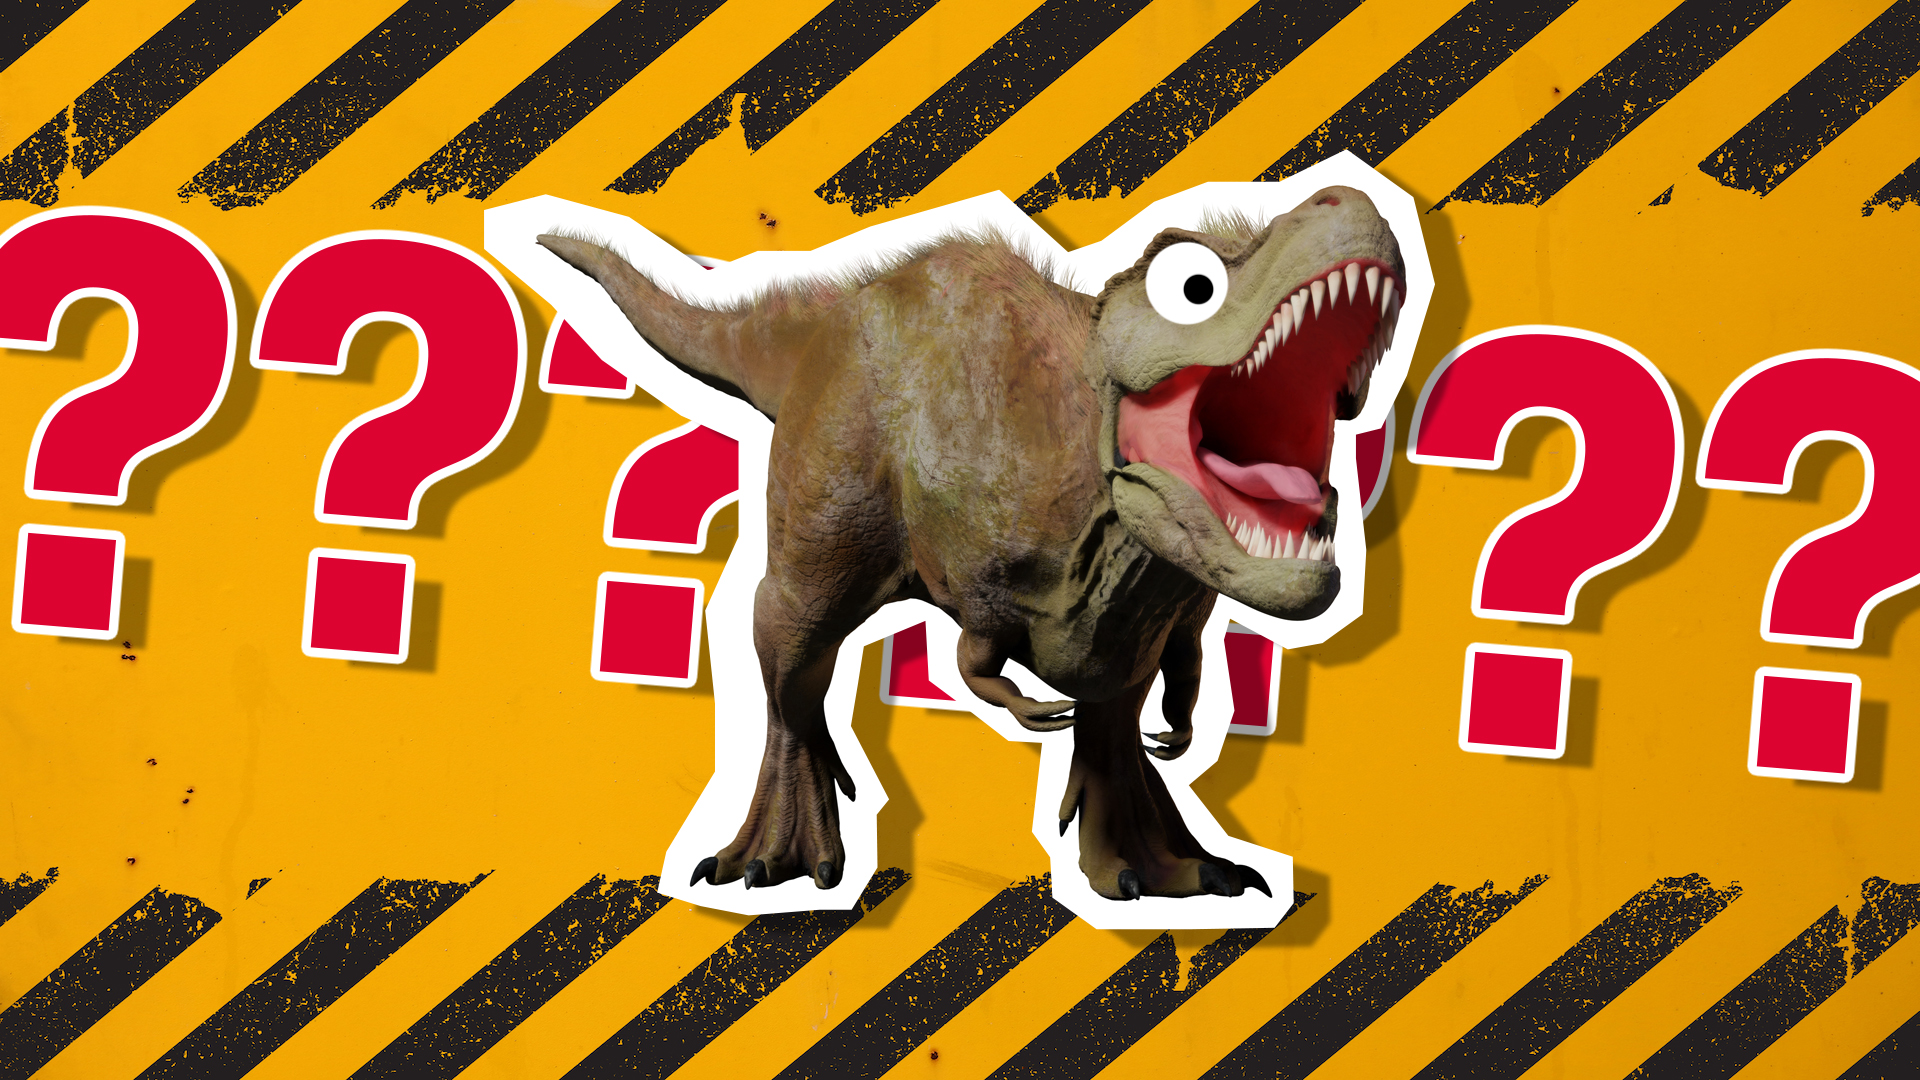 How dinosaur are you?